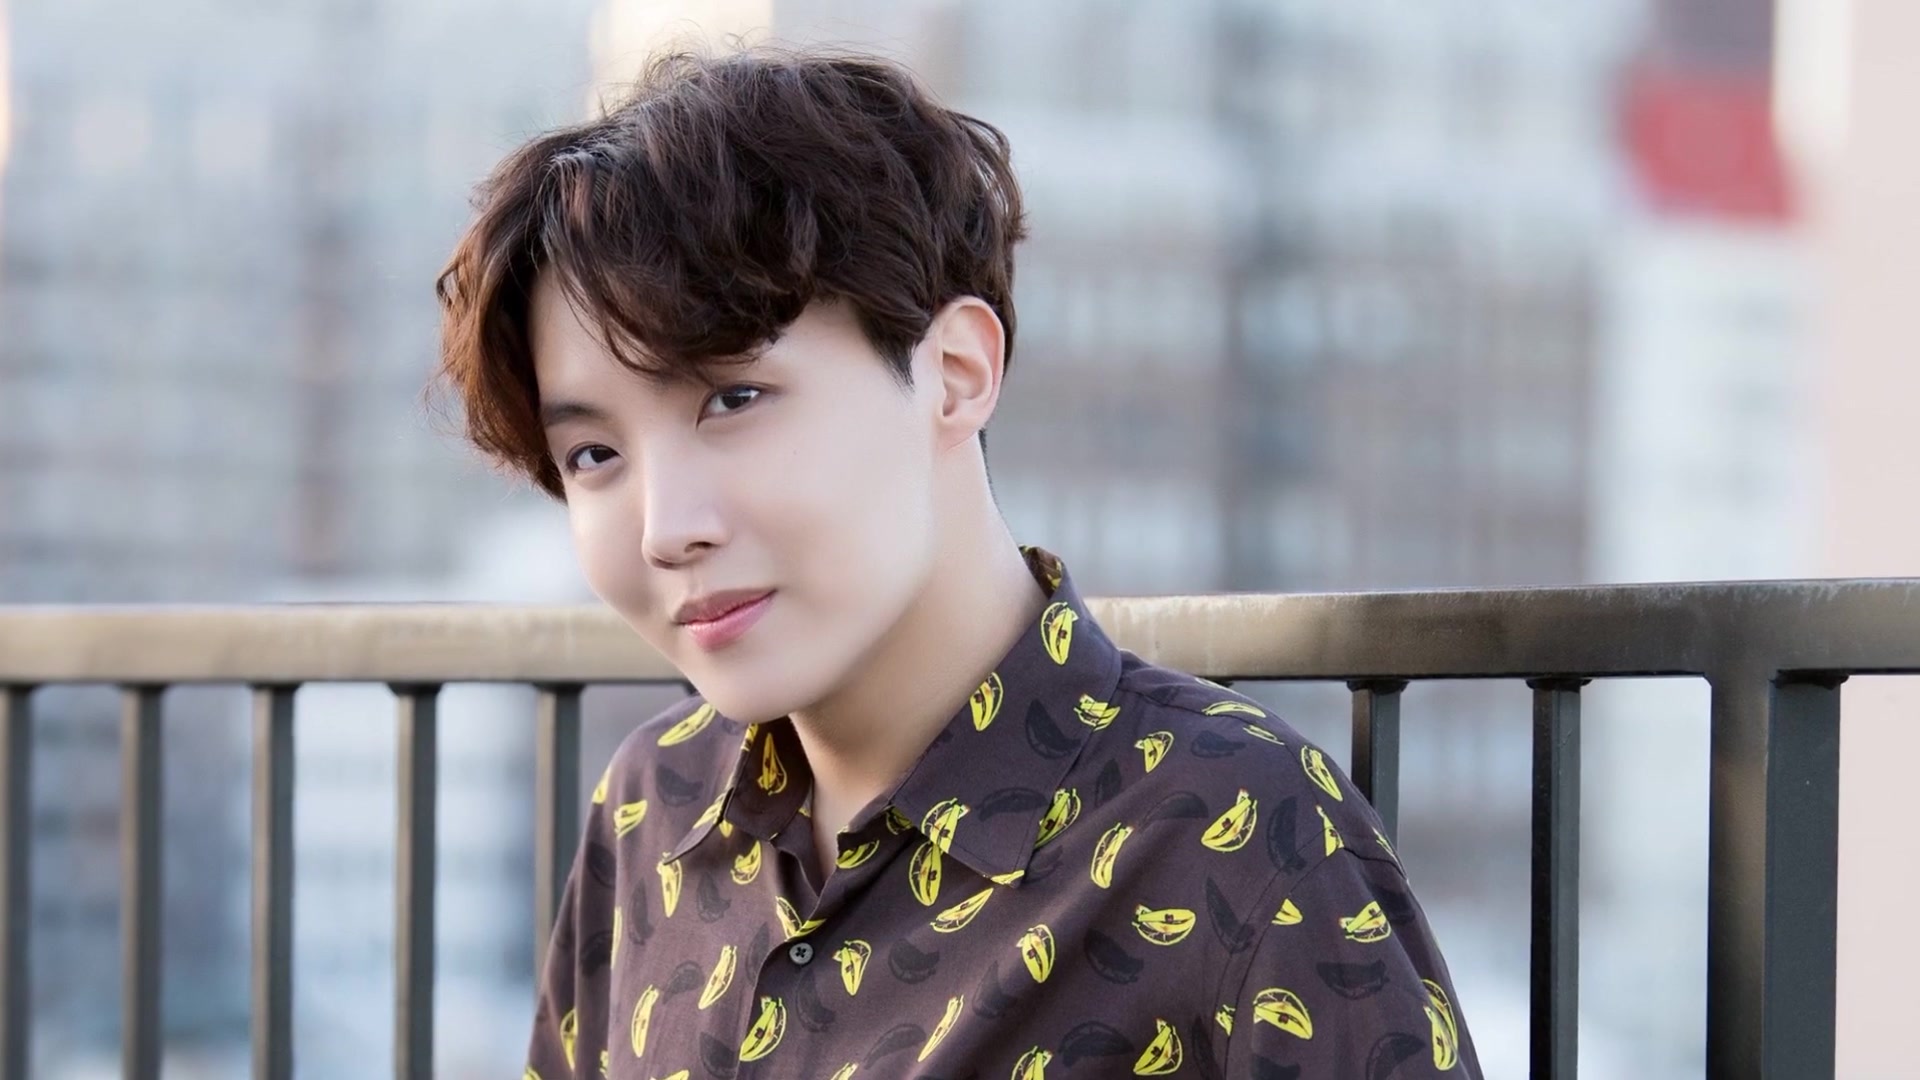 File:J-Hope for BTS 5th anniversary party in LA photoshoot by Dispatch, May  2018 03.jpg - Wikimedia Commons